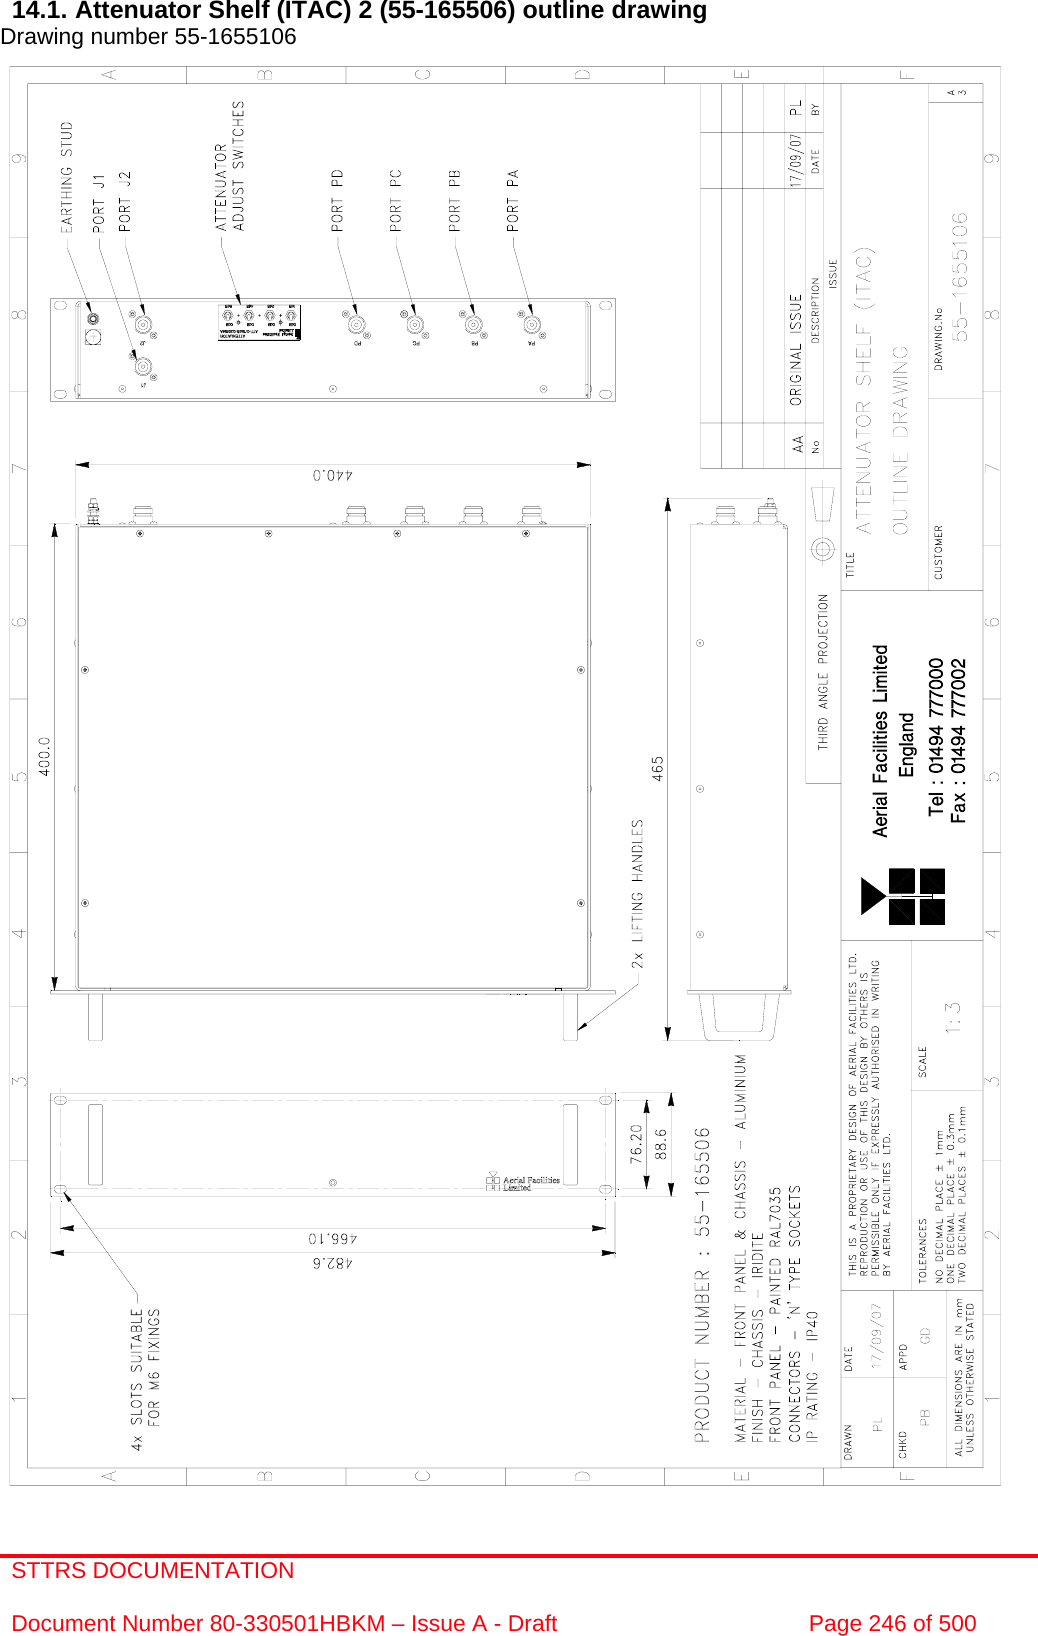 STTRS DOCUMENTATION  Document Number 80-330501HBKM – Issue A - Draft  Page 246 of 500   14.1. Attenuator Shelf (ITAC) 2 (55-165506) outline drawing  Drawing number 55-1655106                                                     